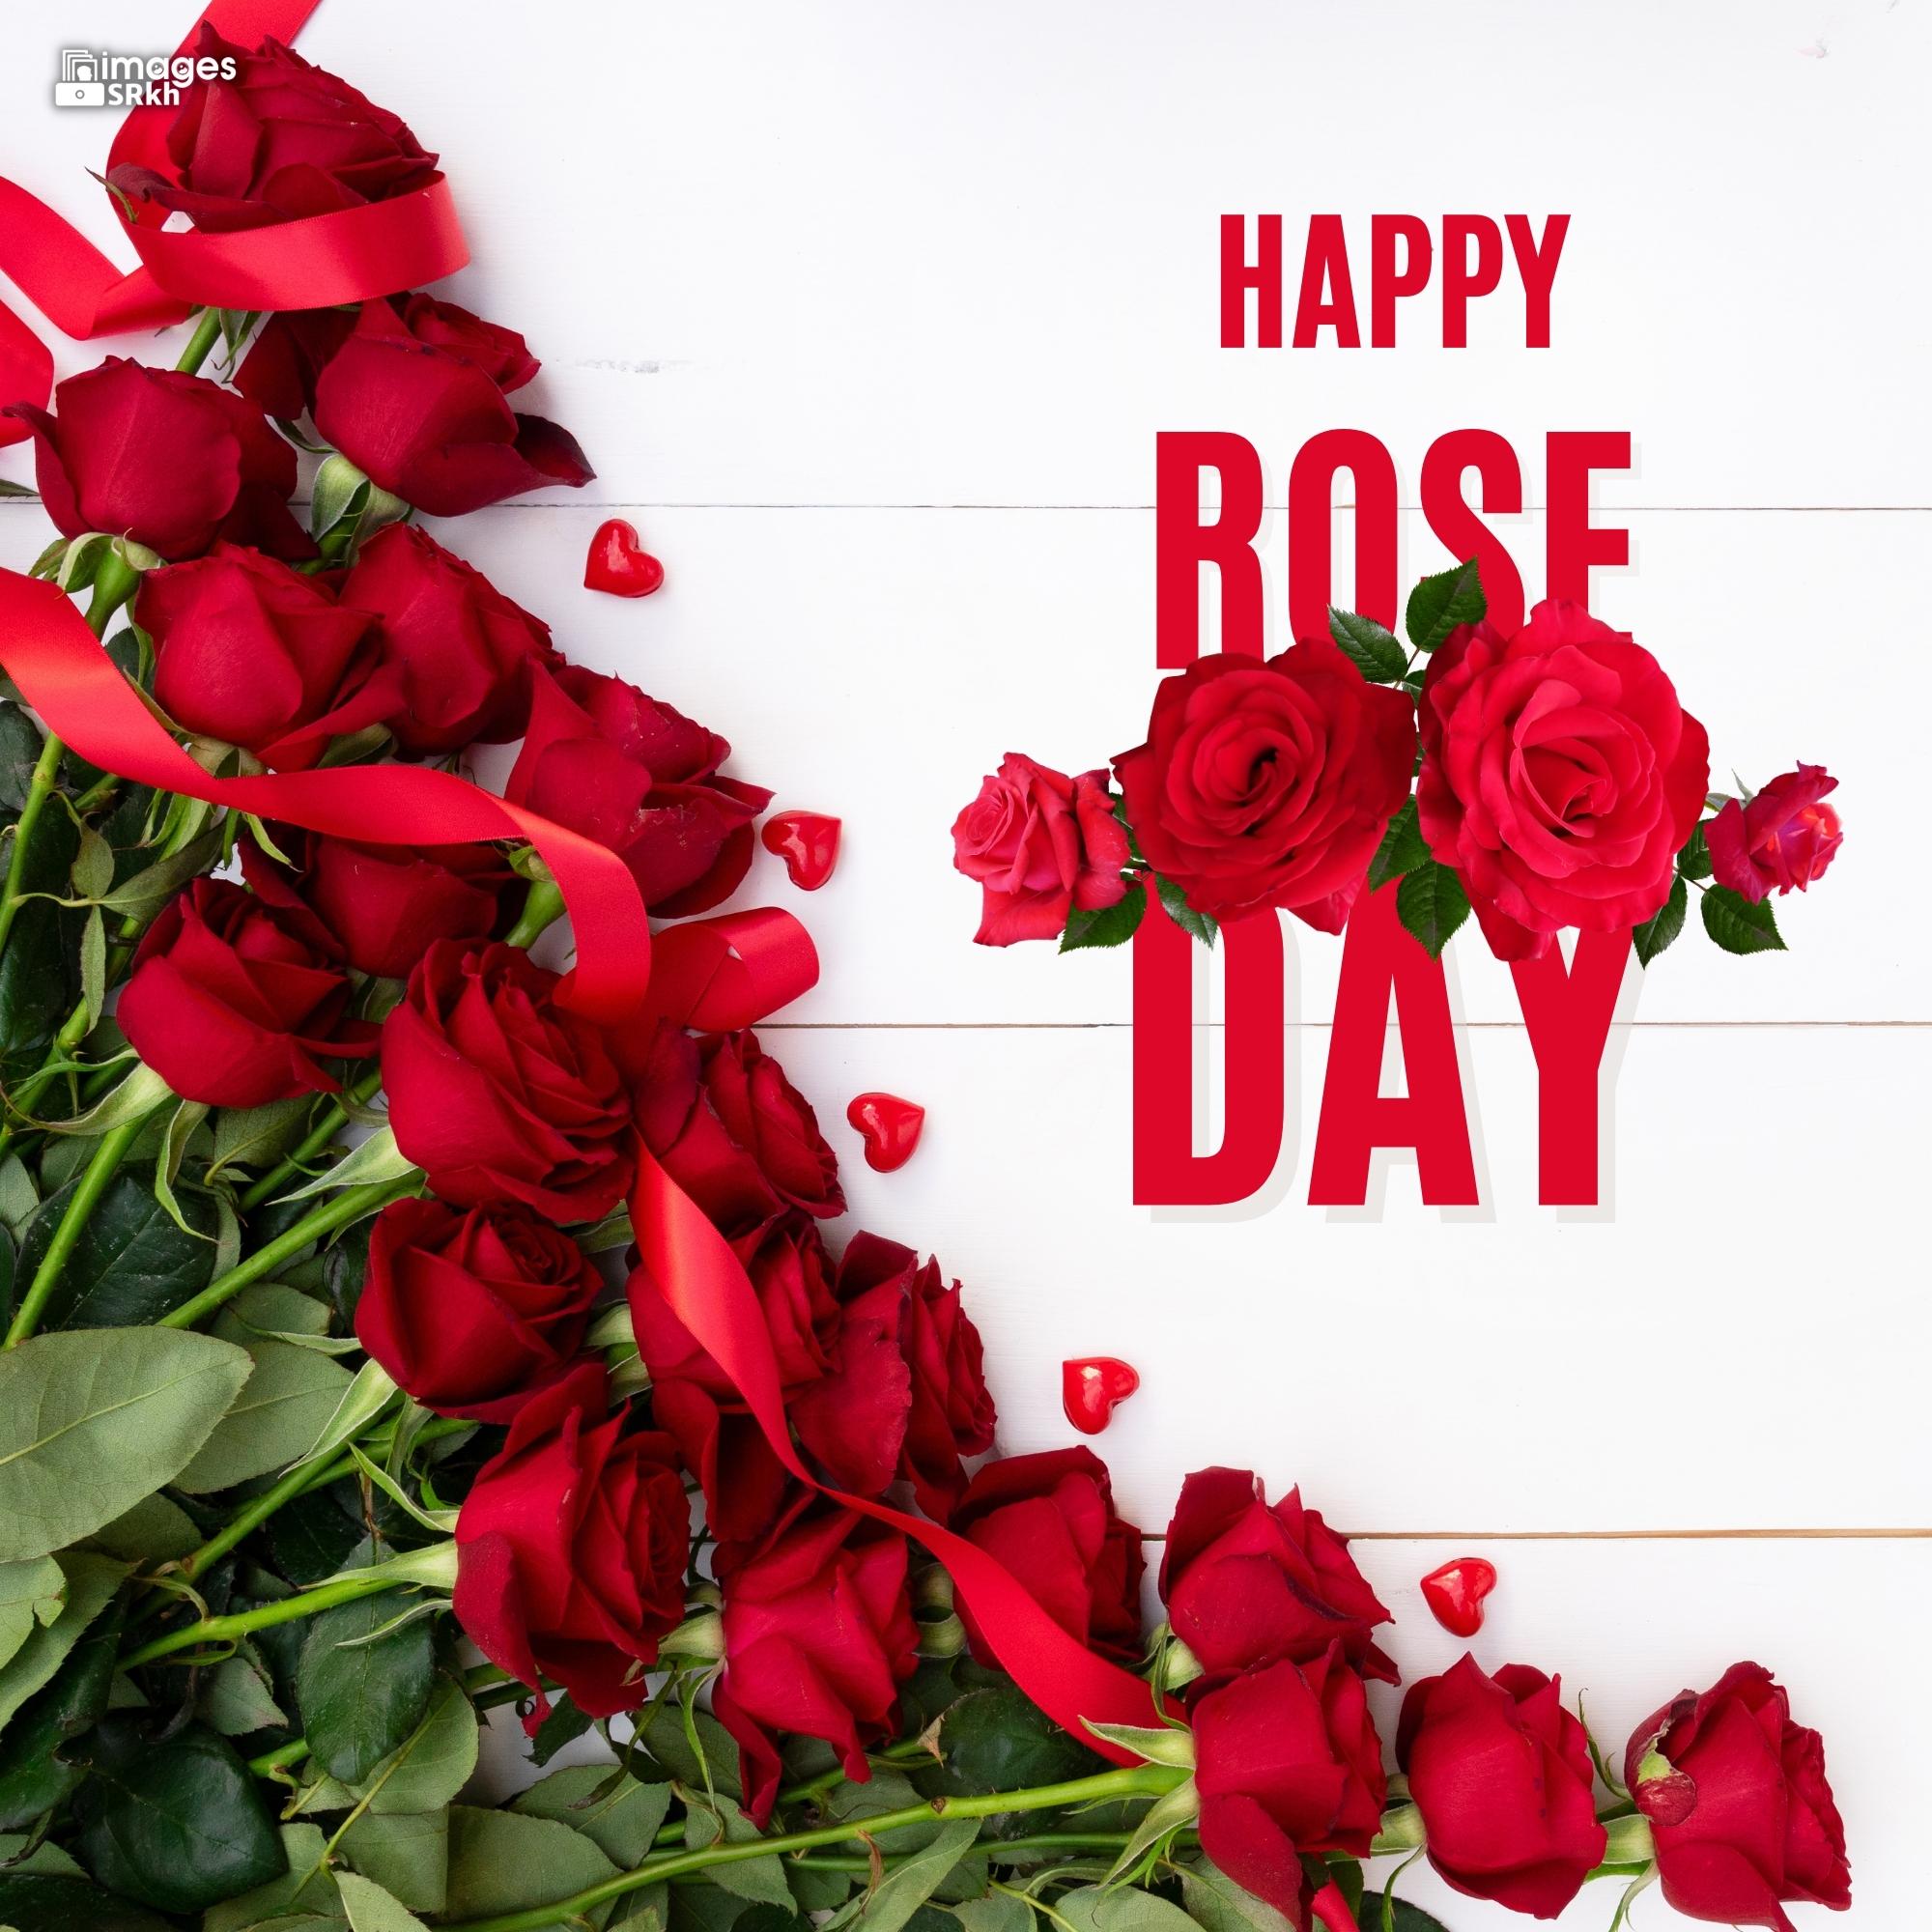 Happy Rose Day Image Hd Download (62)